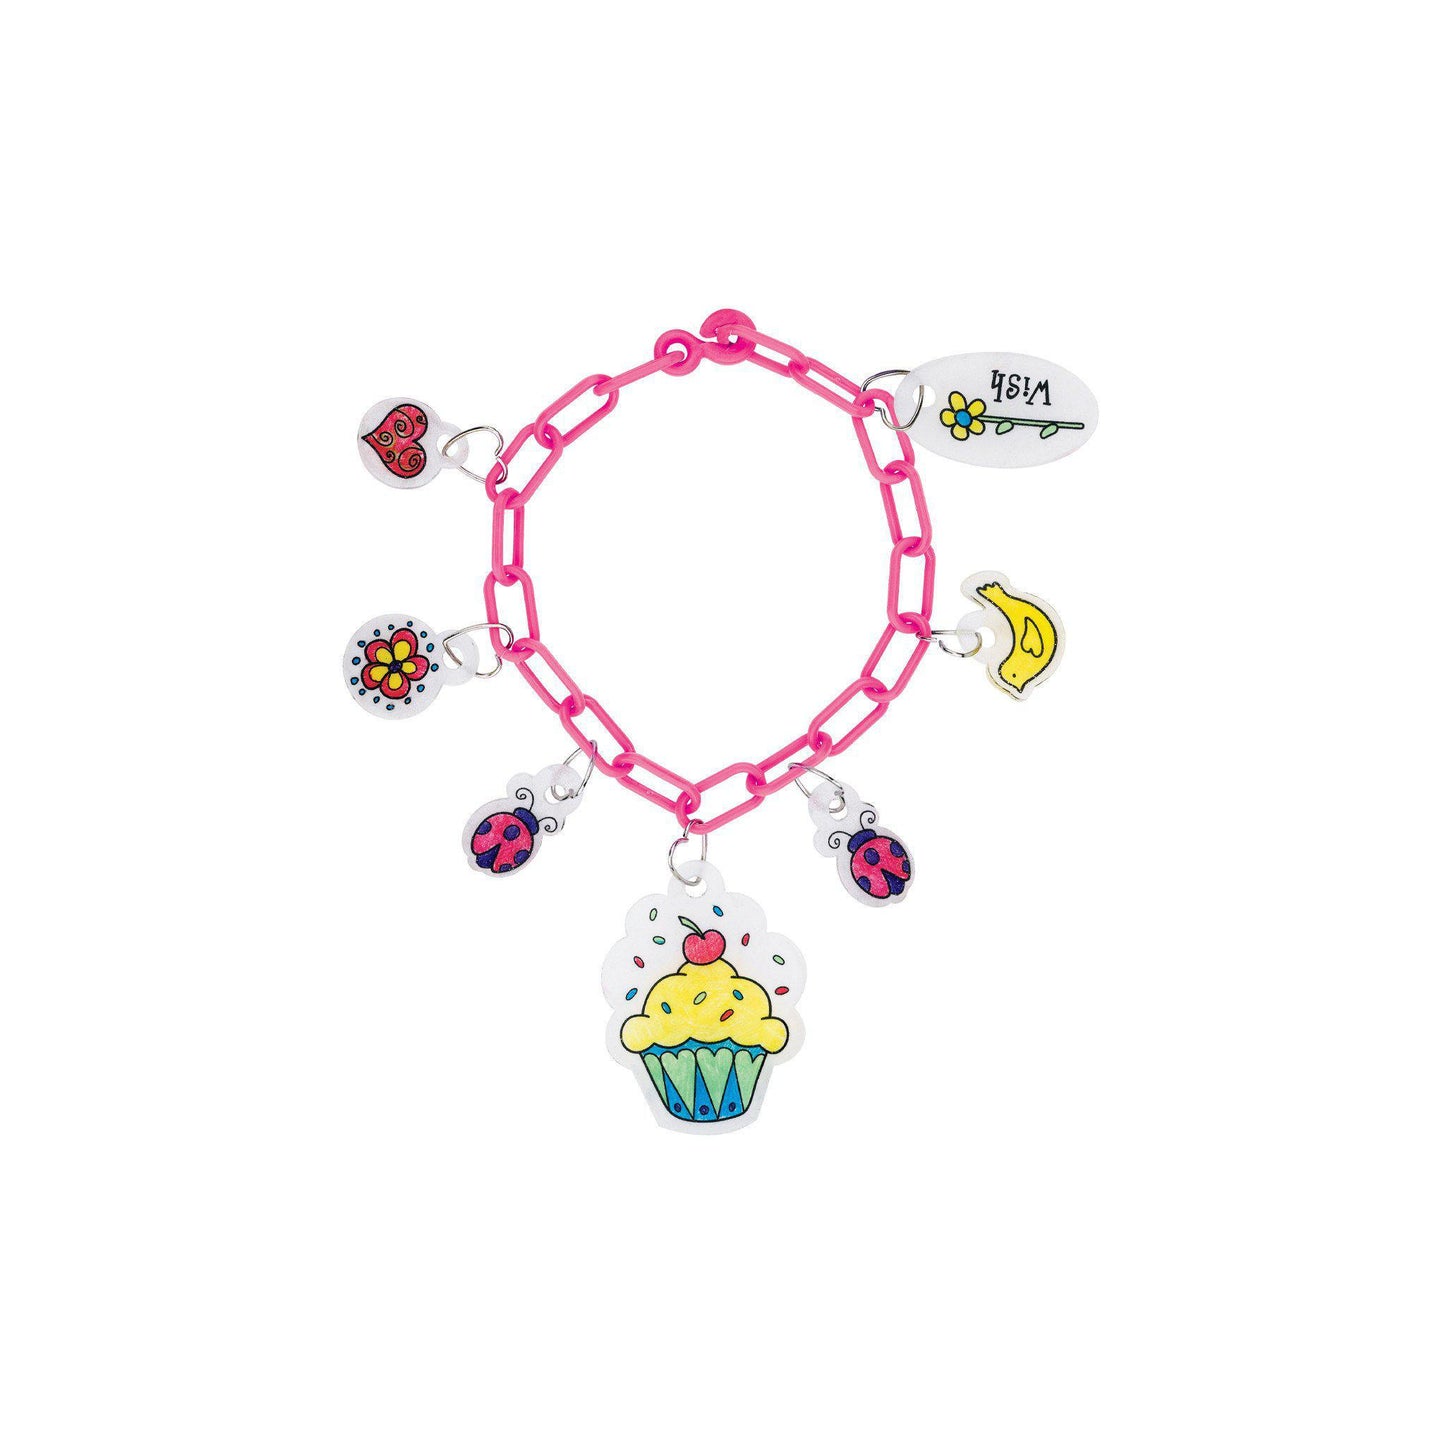 Creativity for Kids Shrink Fun BFF Jewelry Mini Craft Kit - Create and Bake 4 Friendship Bracelets, Perfect For Parties